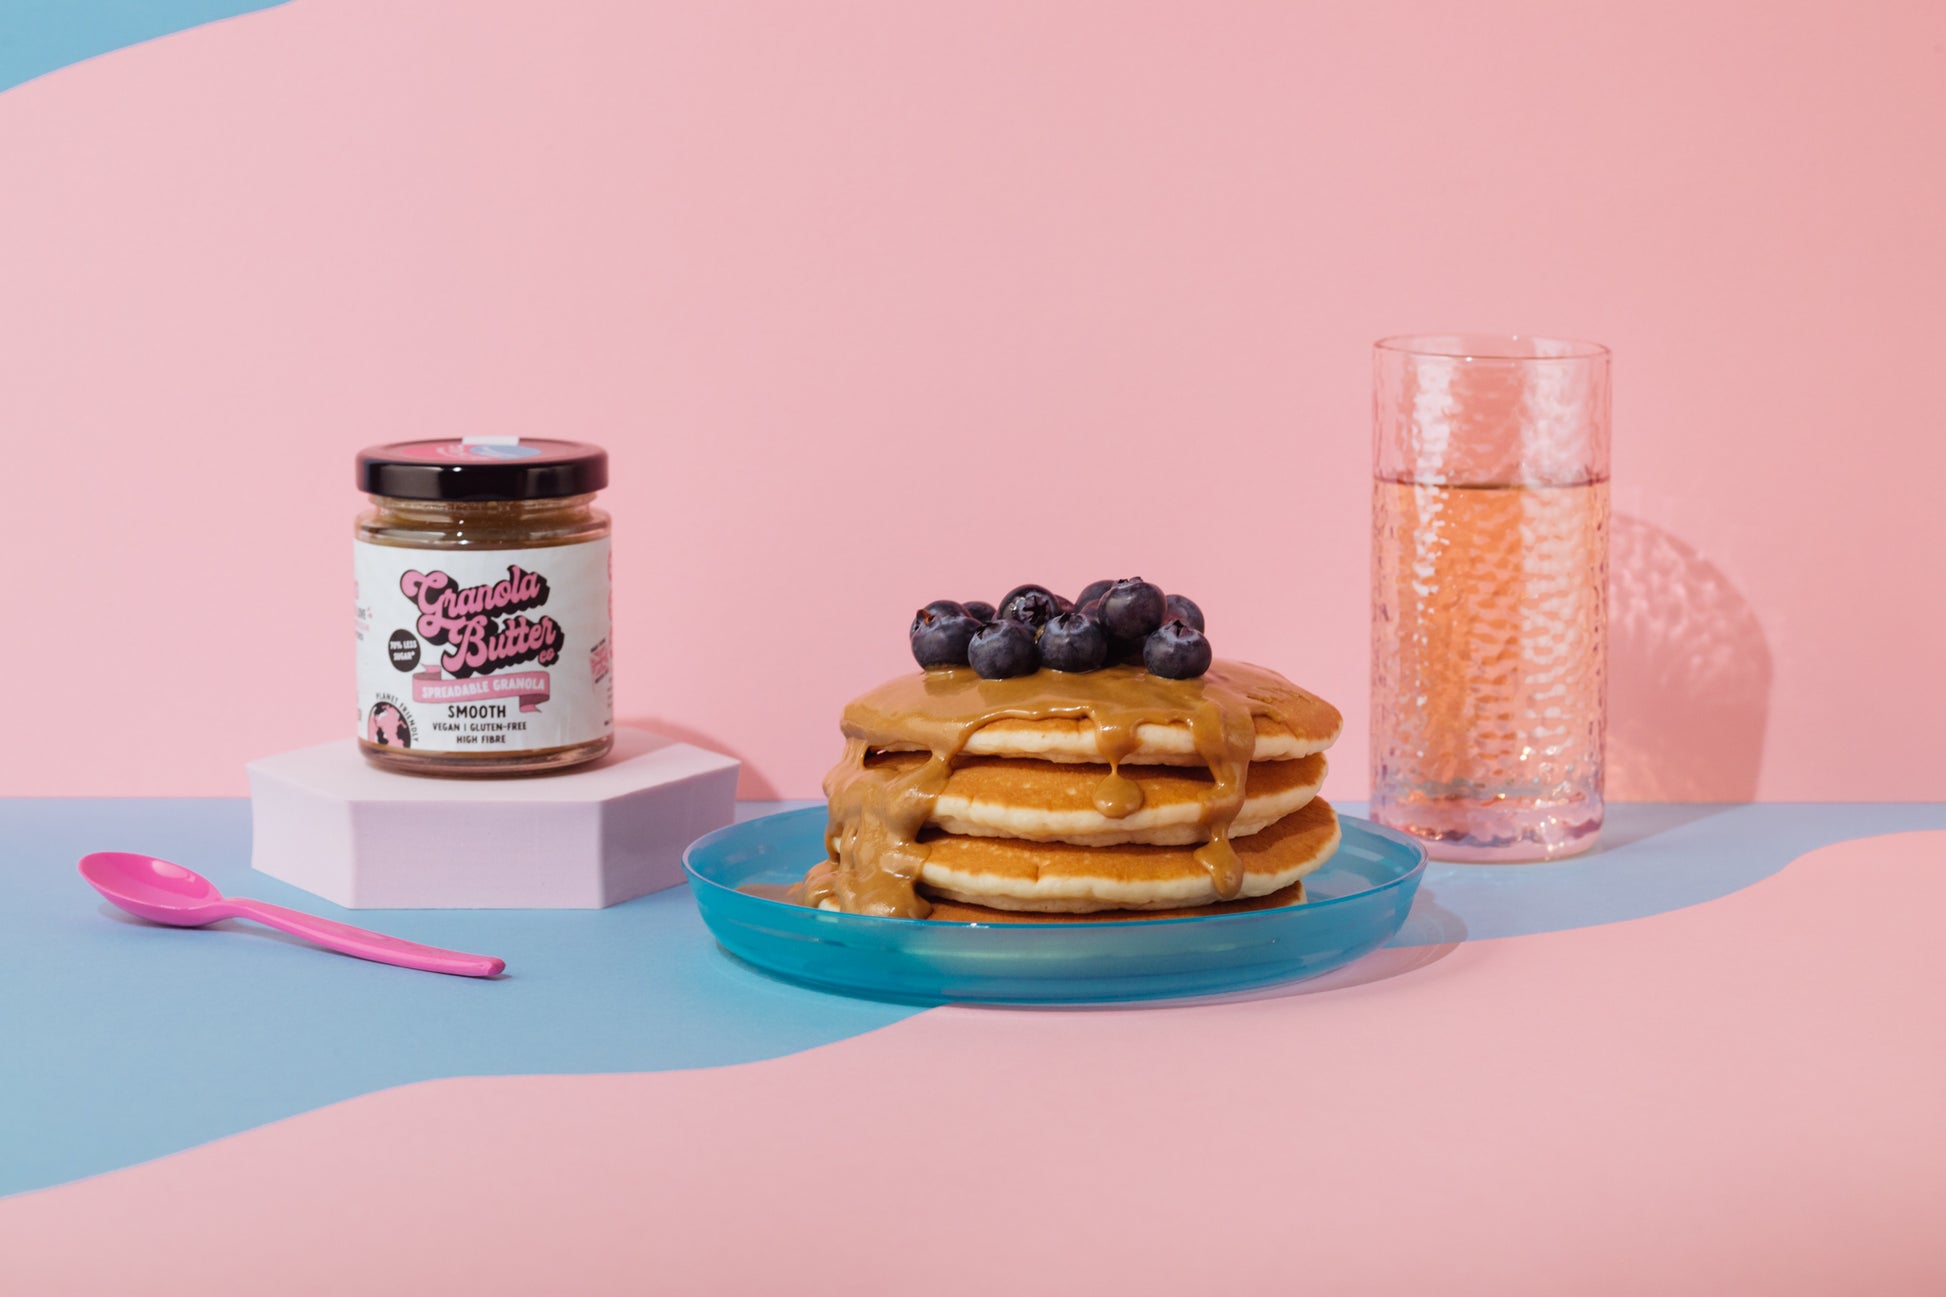 Vegan pancakes stacked and coated in smooth granola butter with blueberries scattered on top. A jar of the sweet spread is placed next to the breakfast delight. 